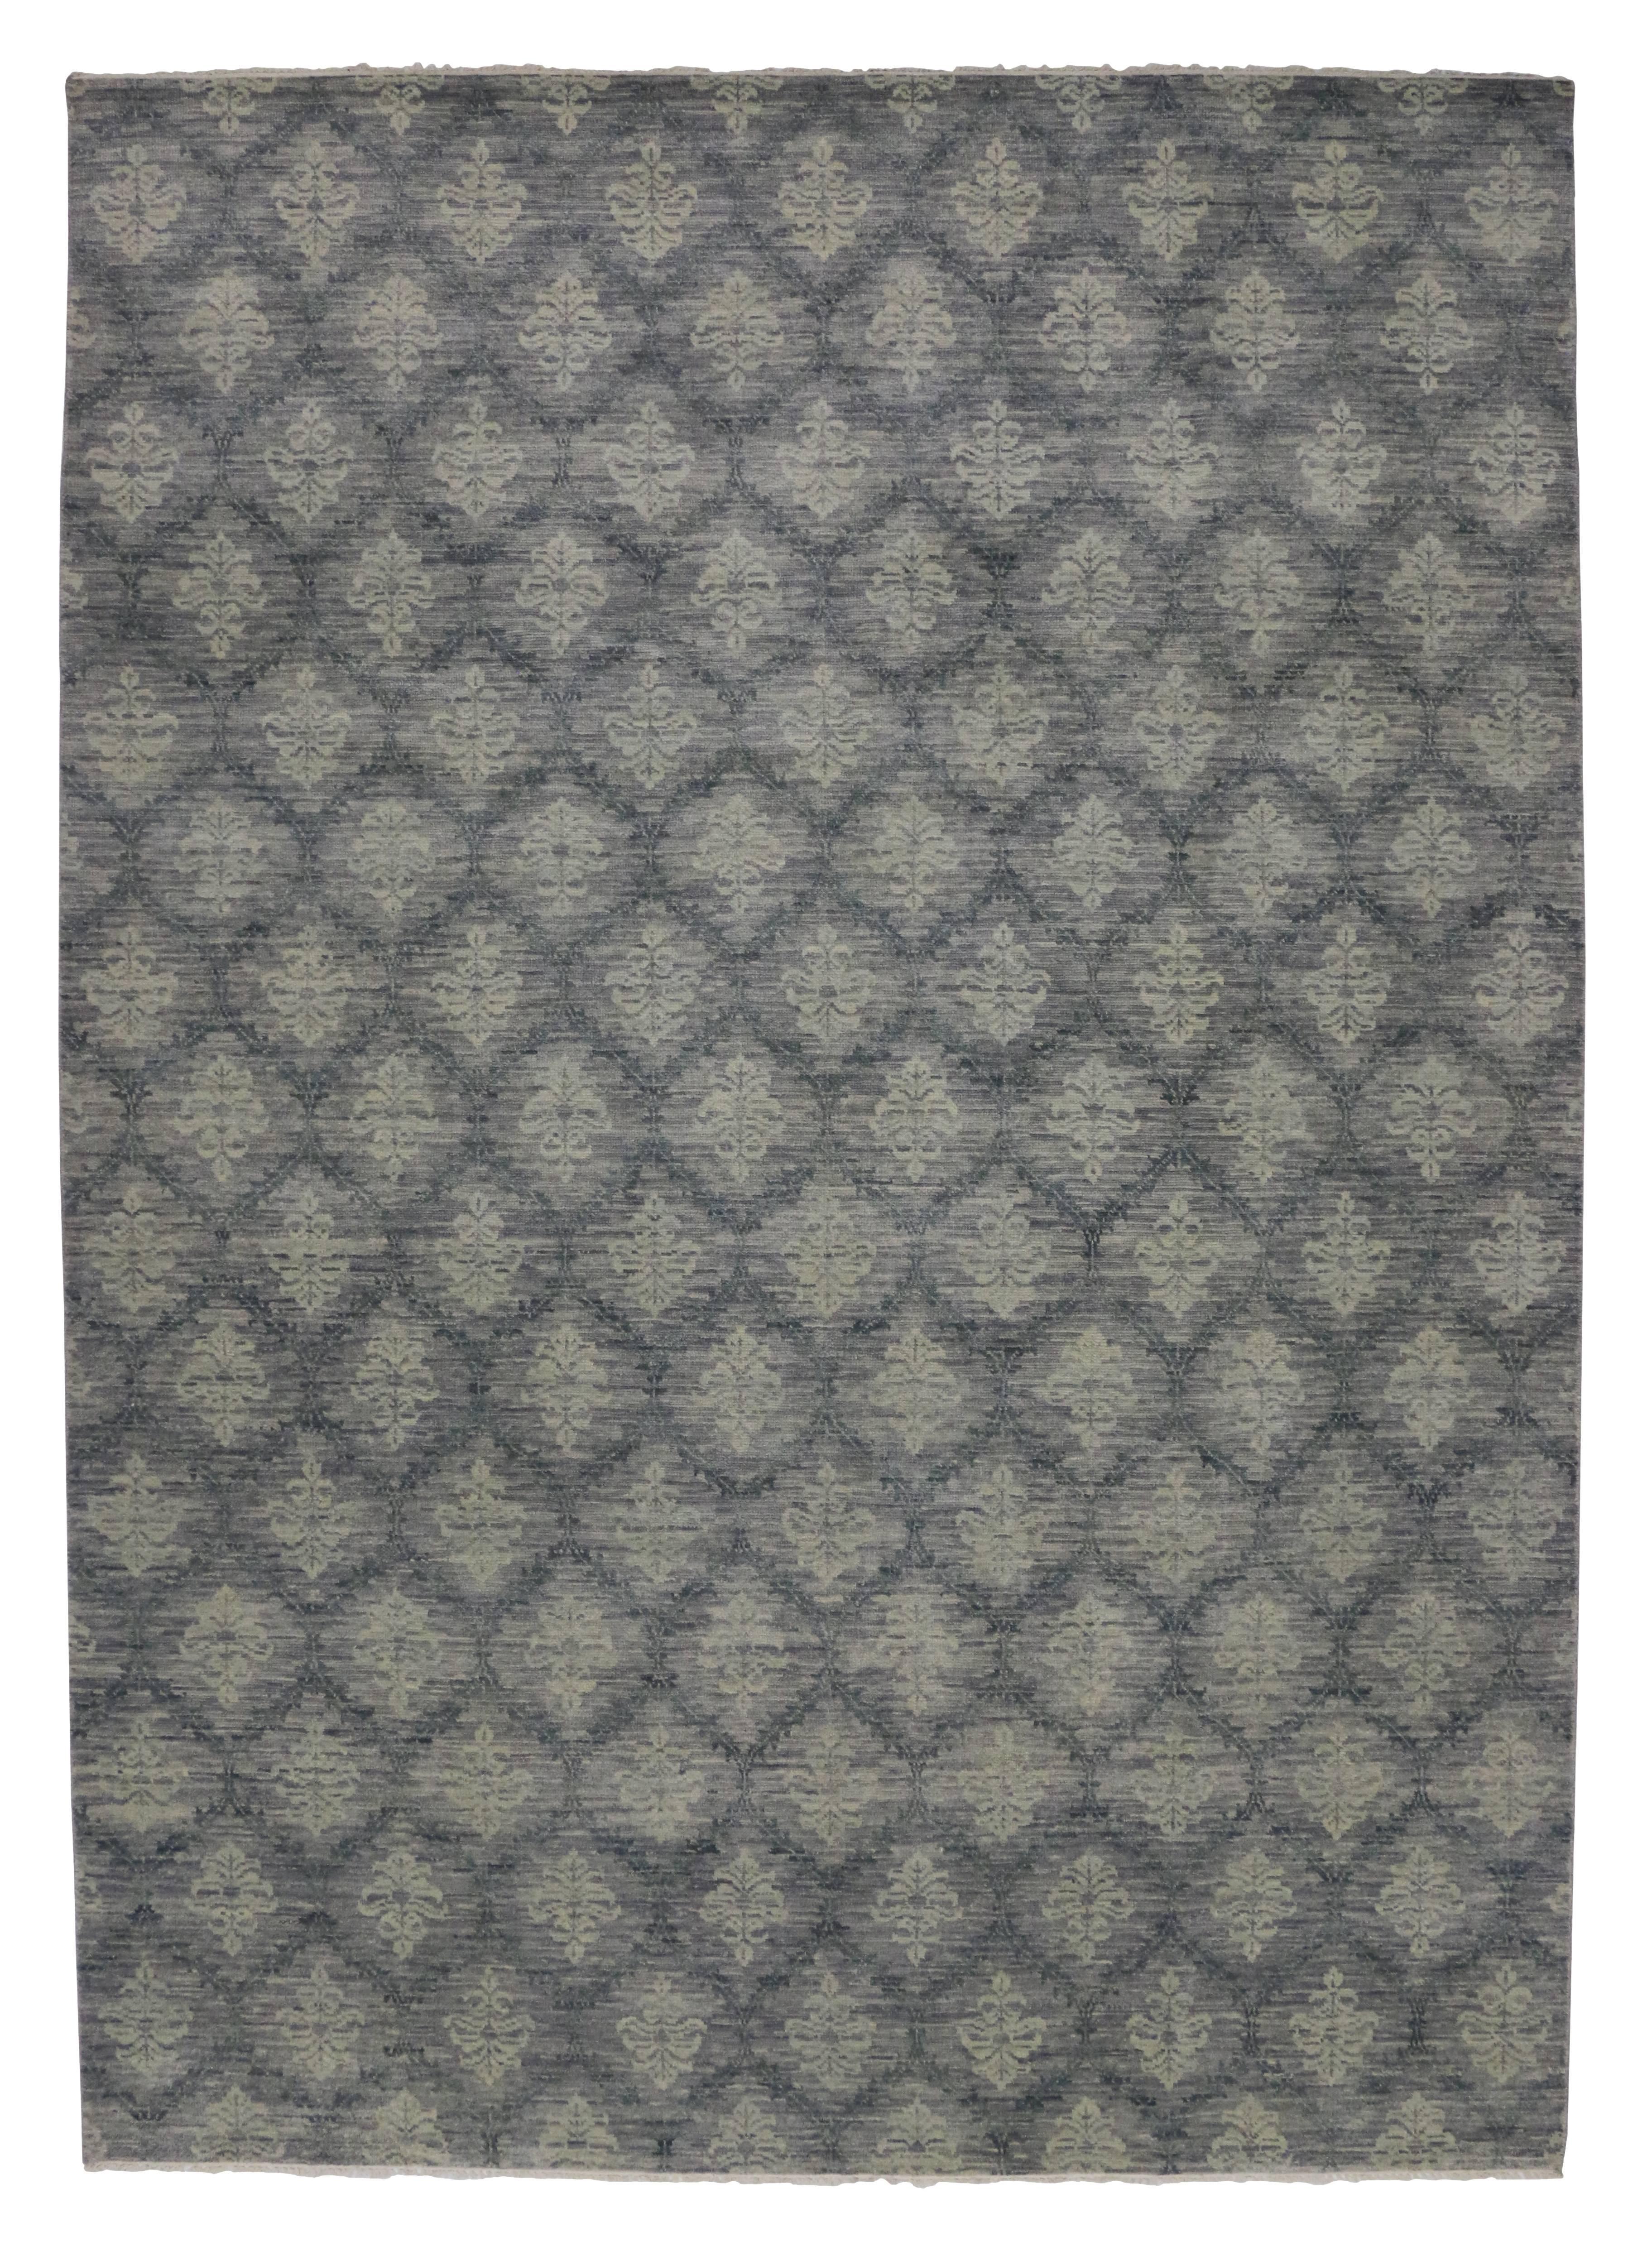 Indian New Modern Transitional Damask Area Rug, Contemporary Victorian Damask Rug For Sale